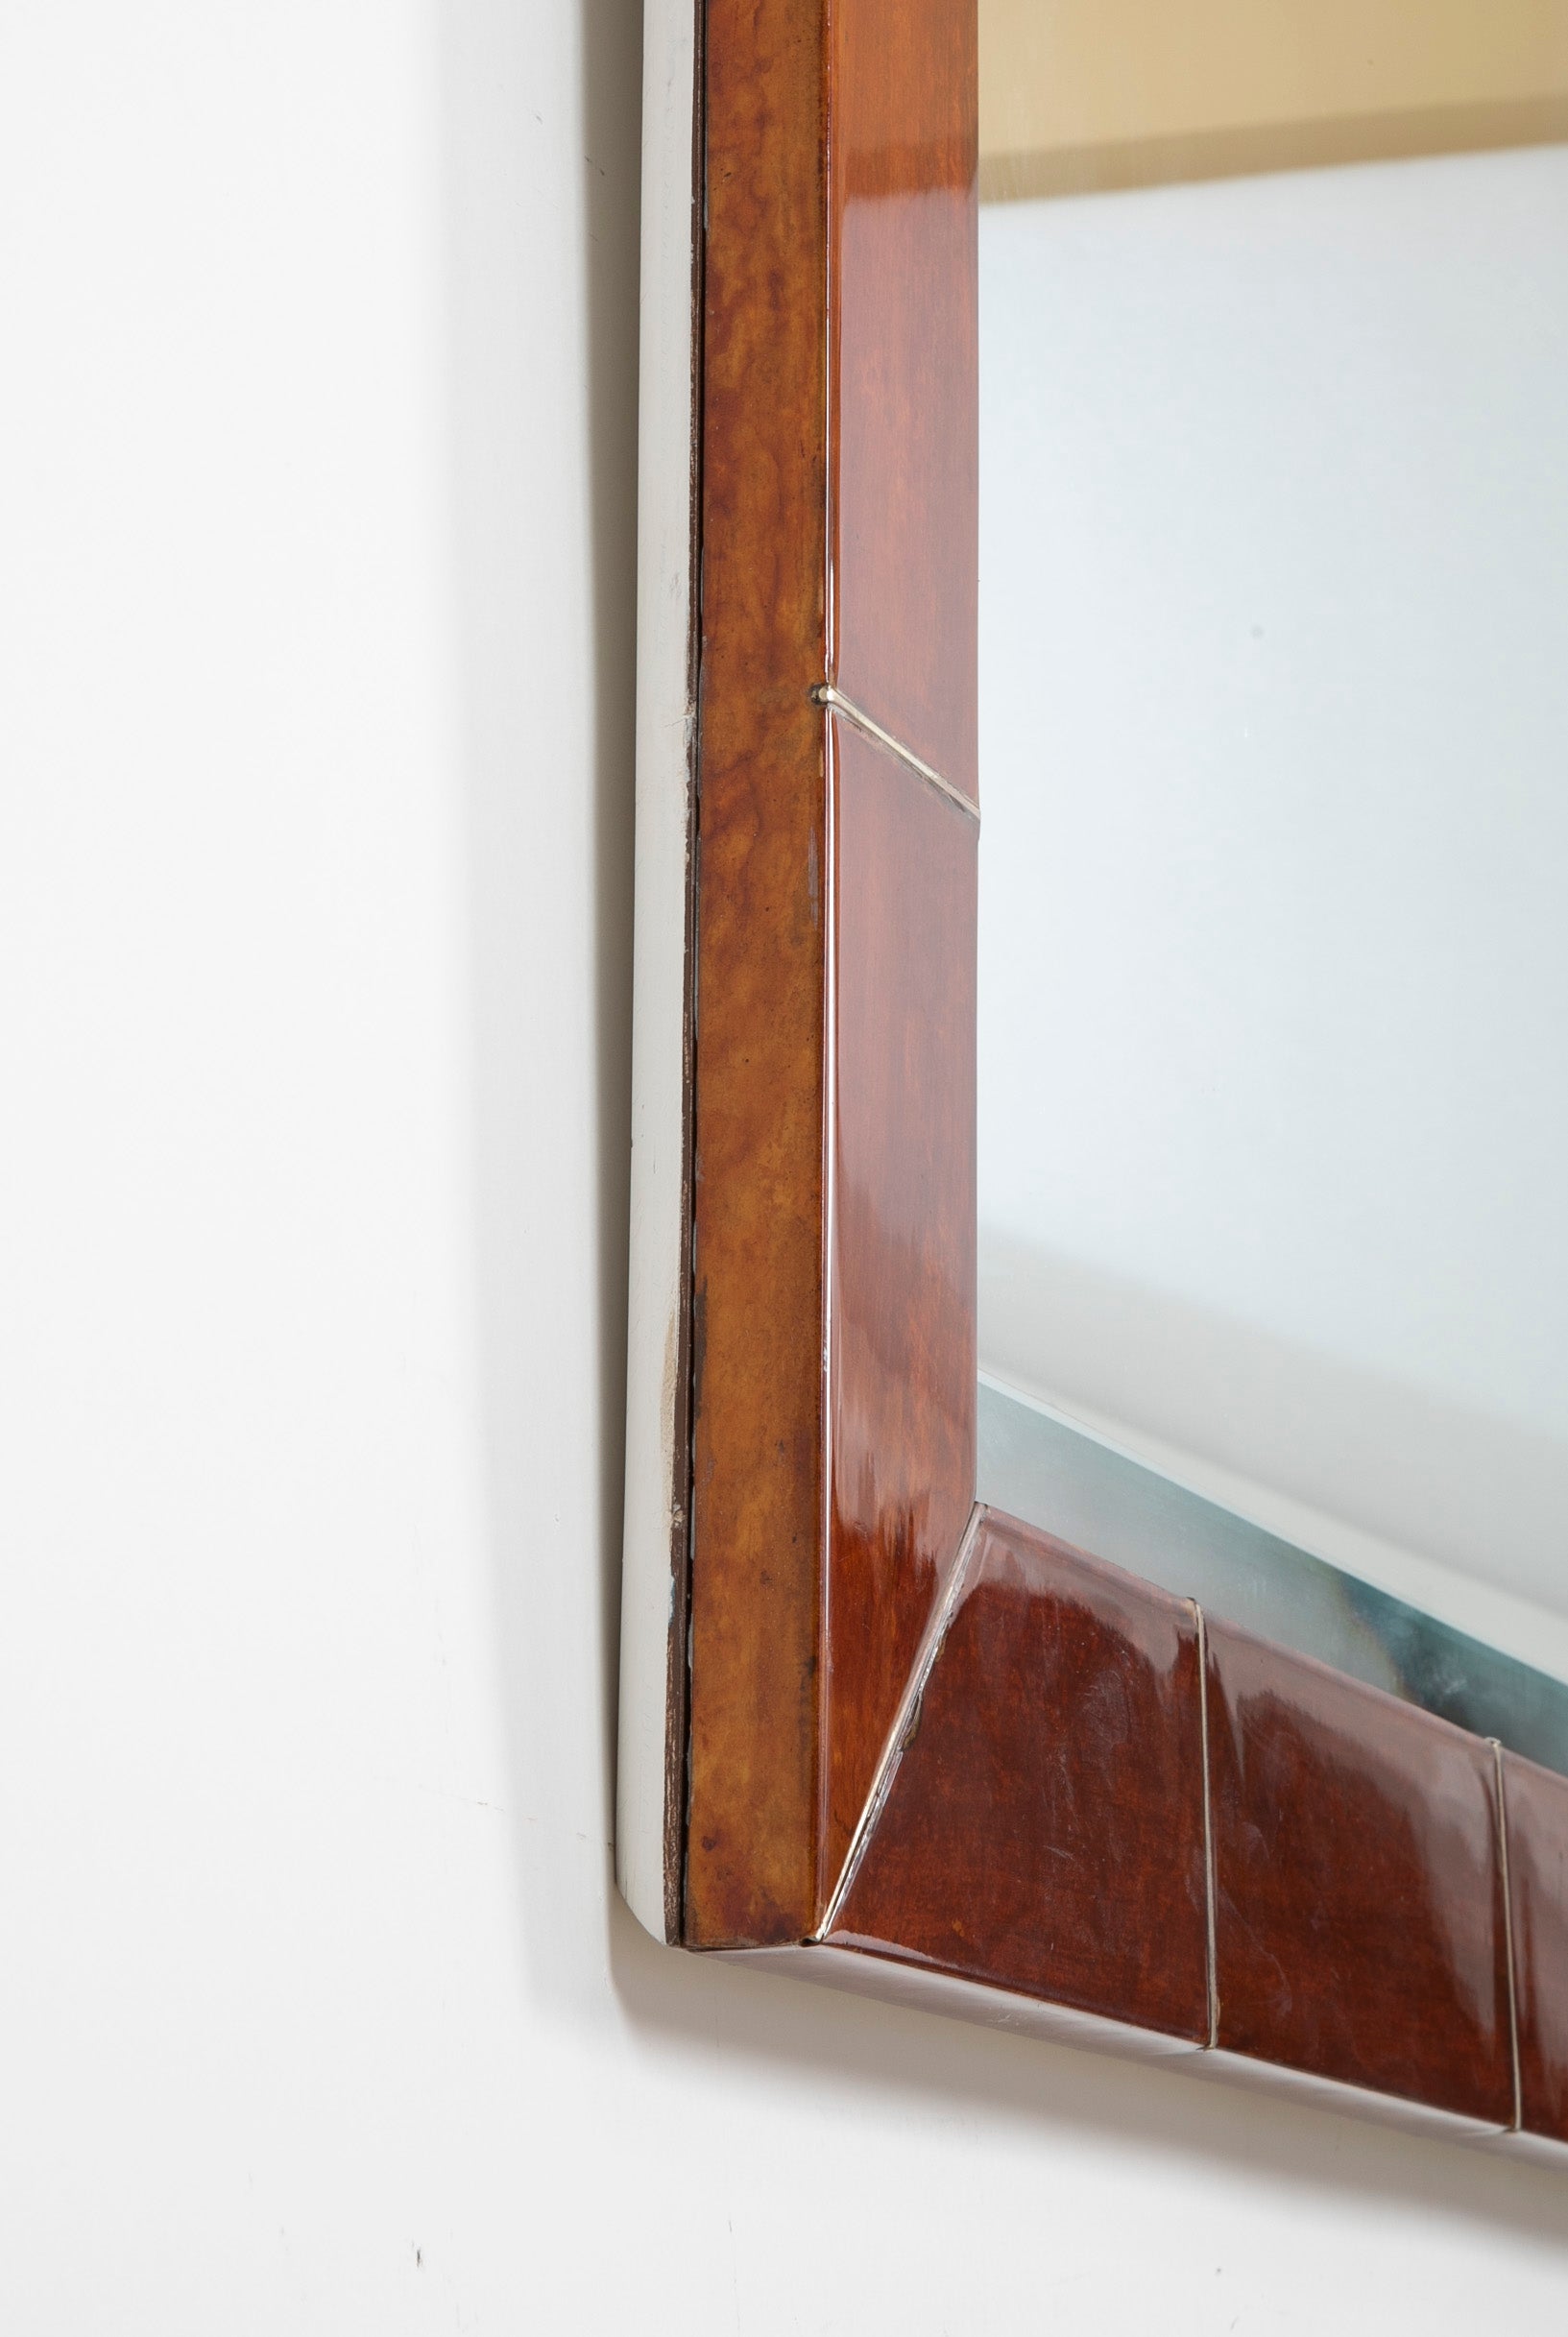 A Large and Important Signed Karl Springer Mirror with Lacquered Goatskin Frame in Tortoise Color